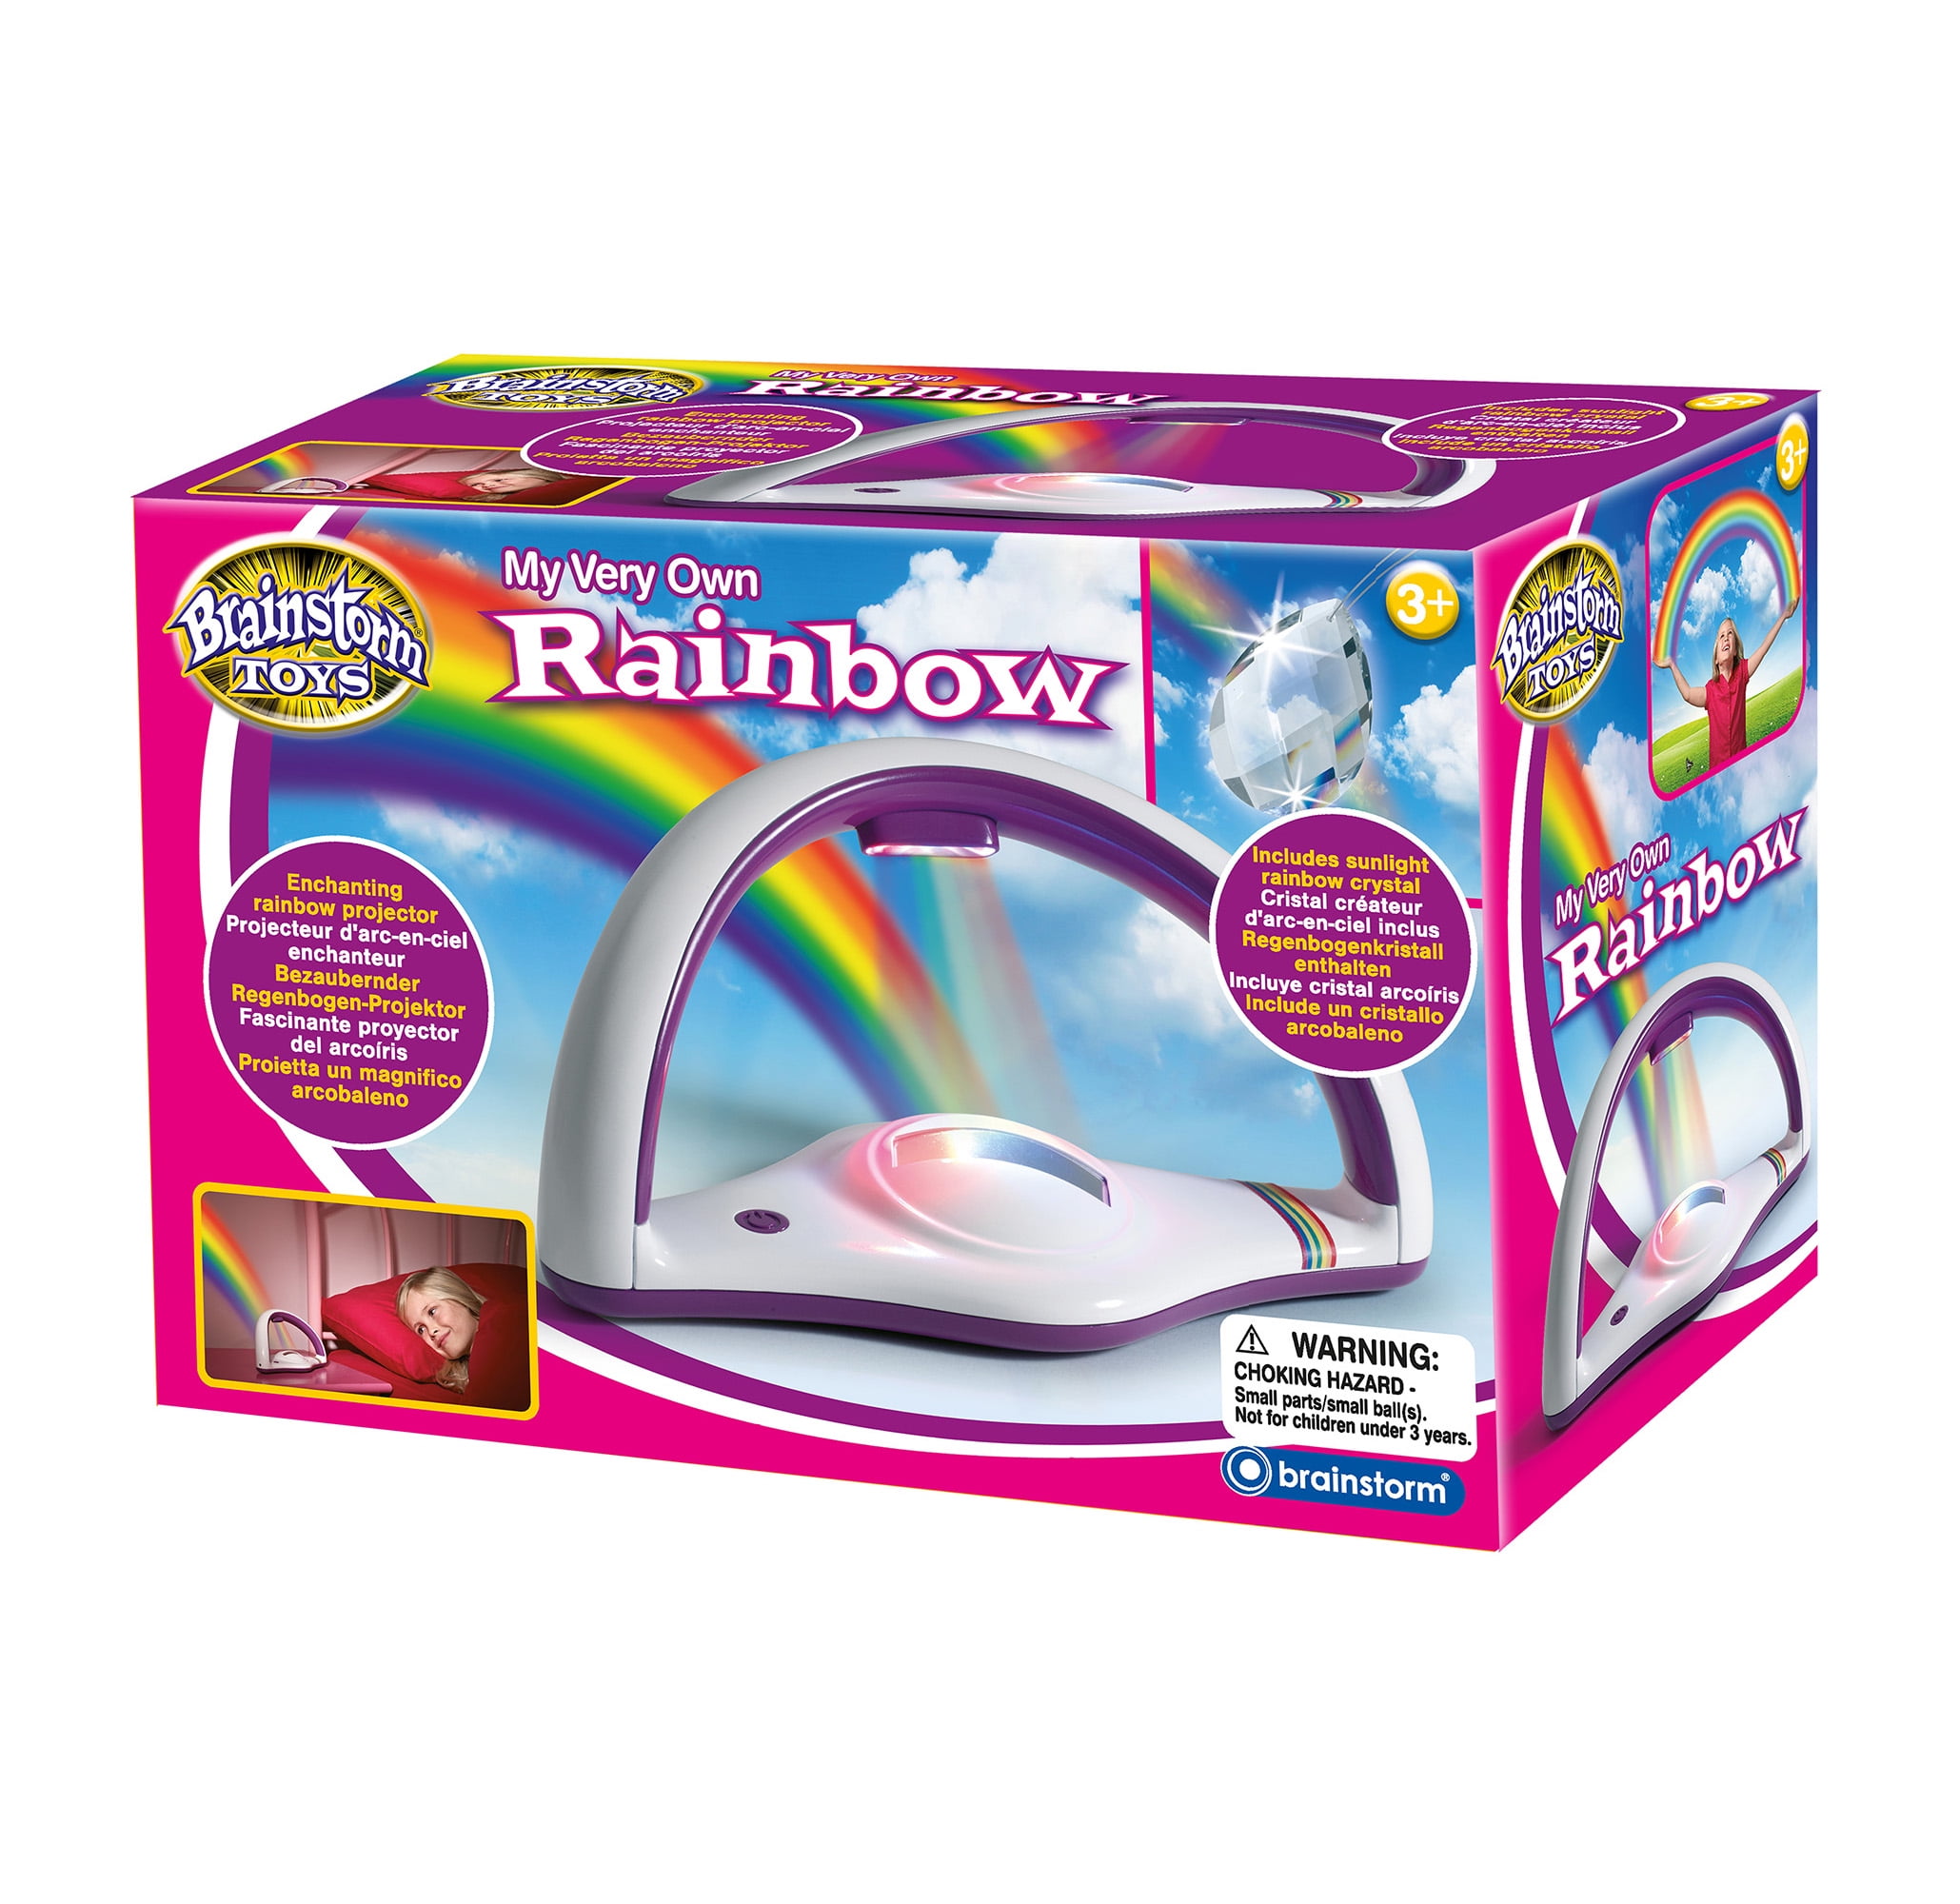 Rainbow Loom, Best Toys 2013: 14 Toys That Will Make Your Kids Smarter